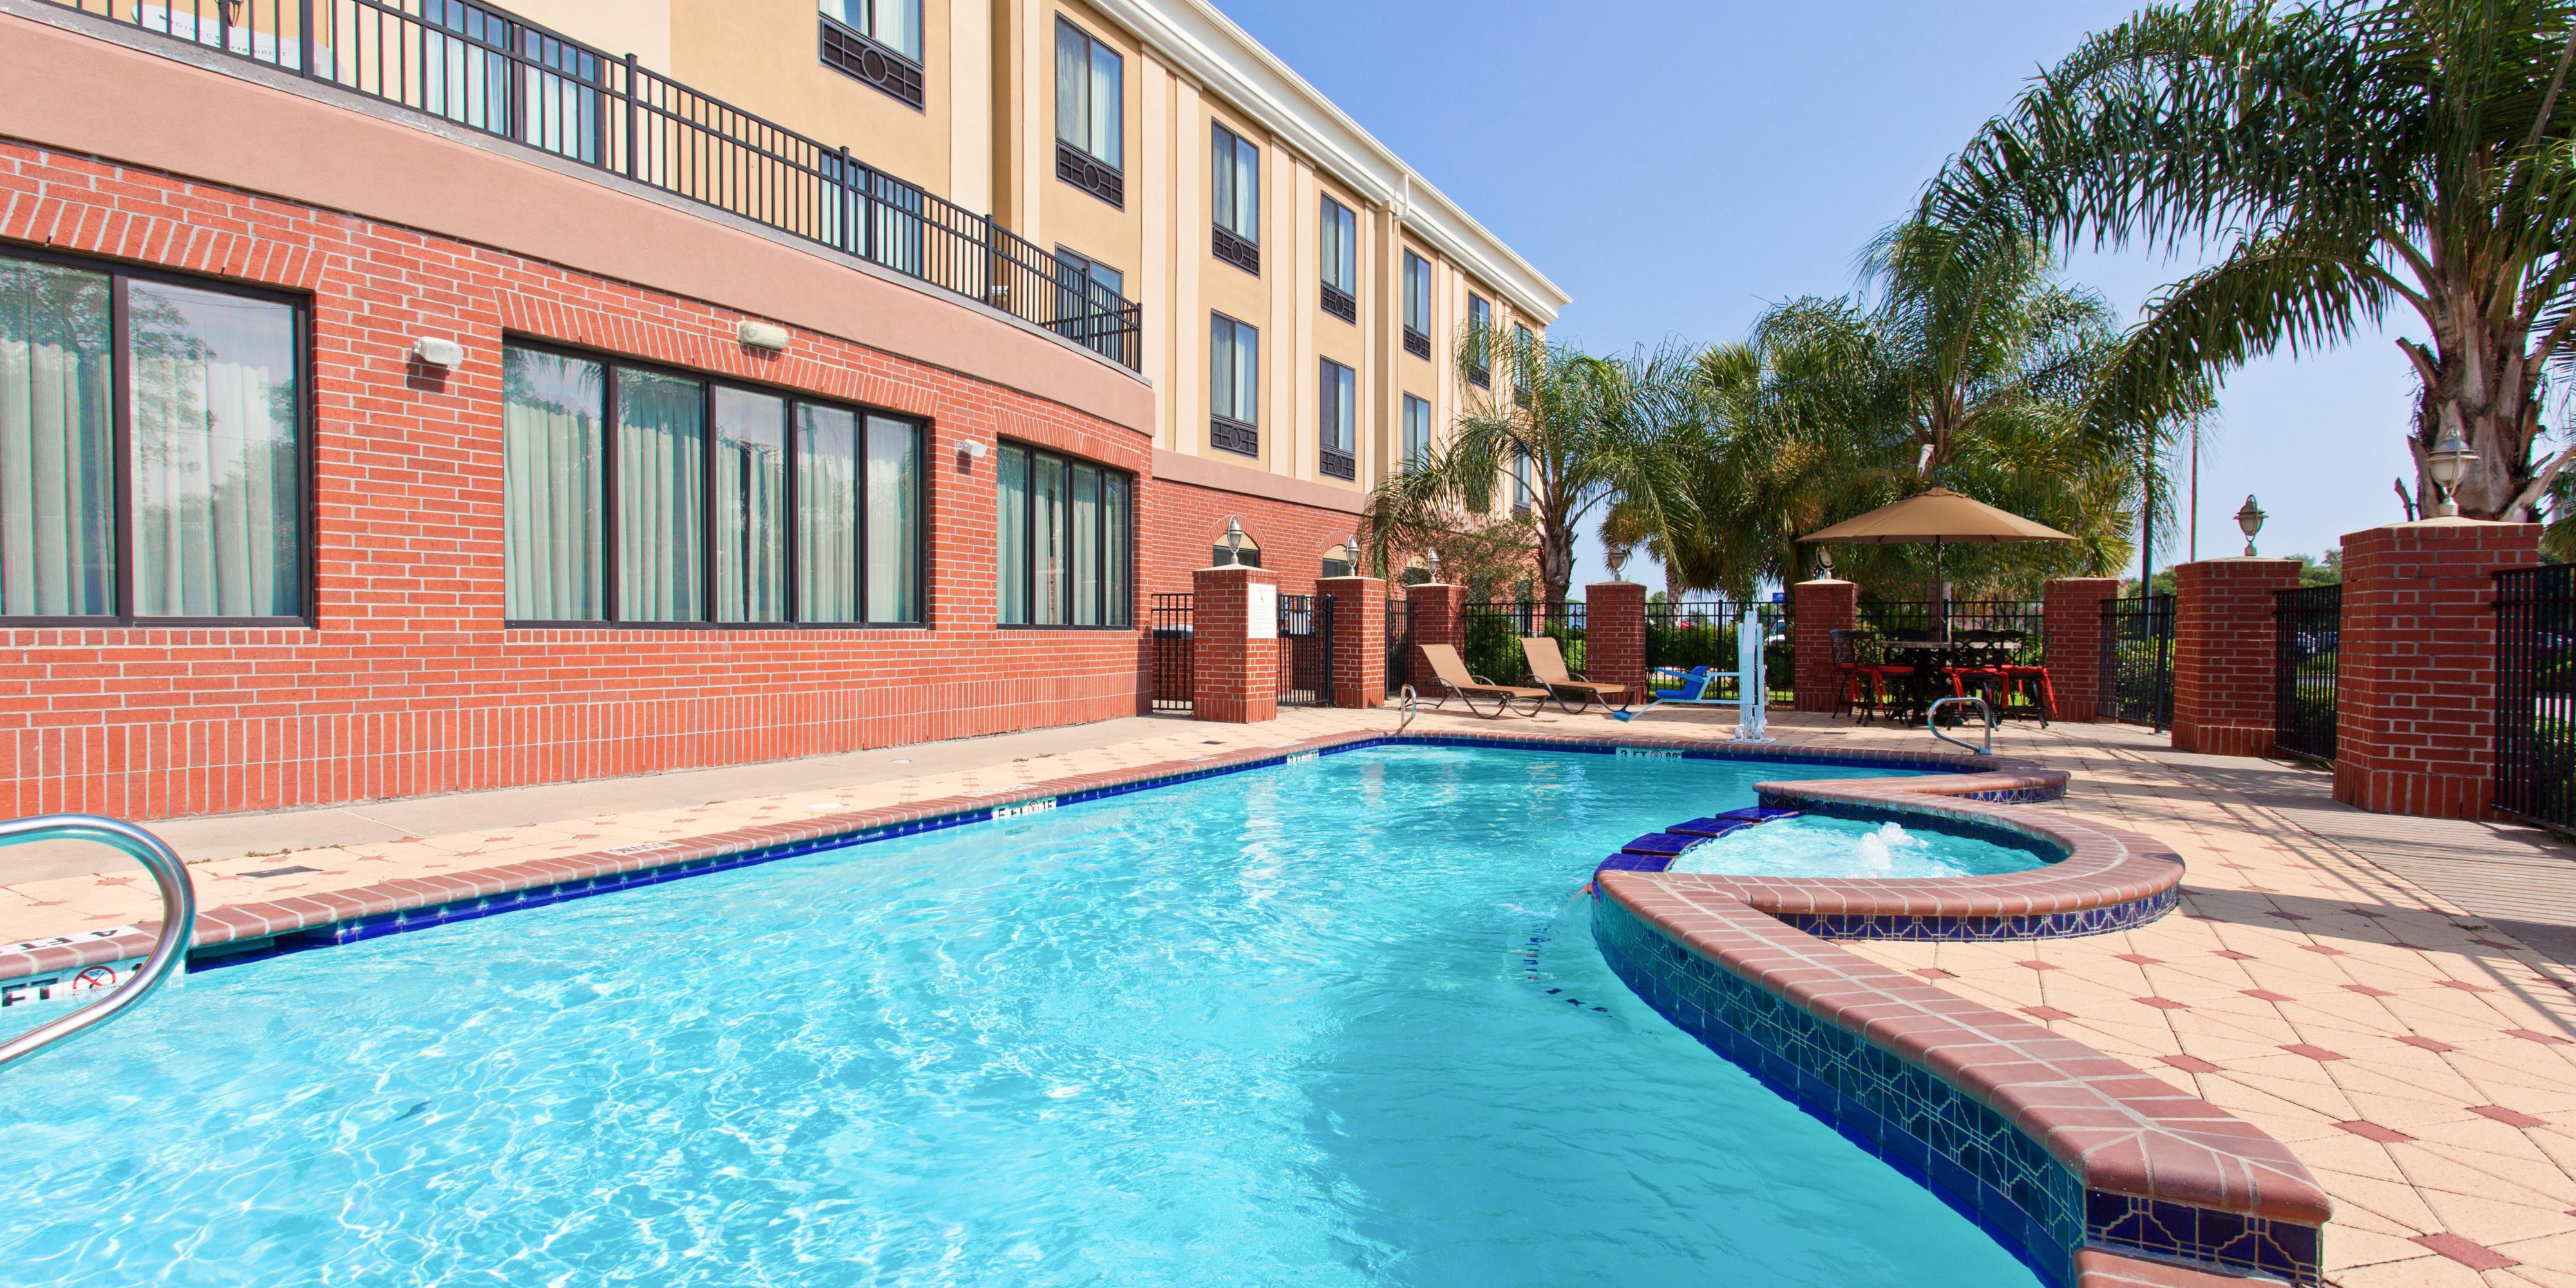 Escape for the weekend and enjoy our outdoor pool